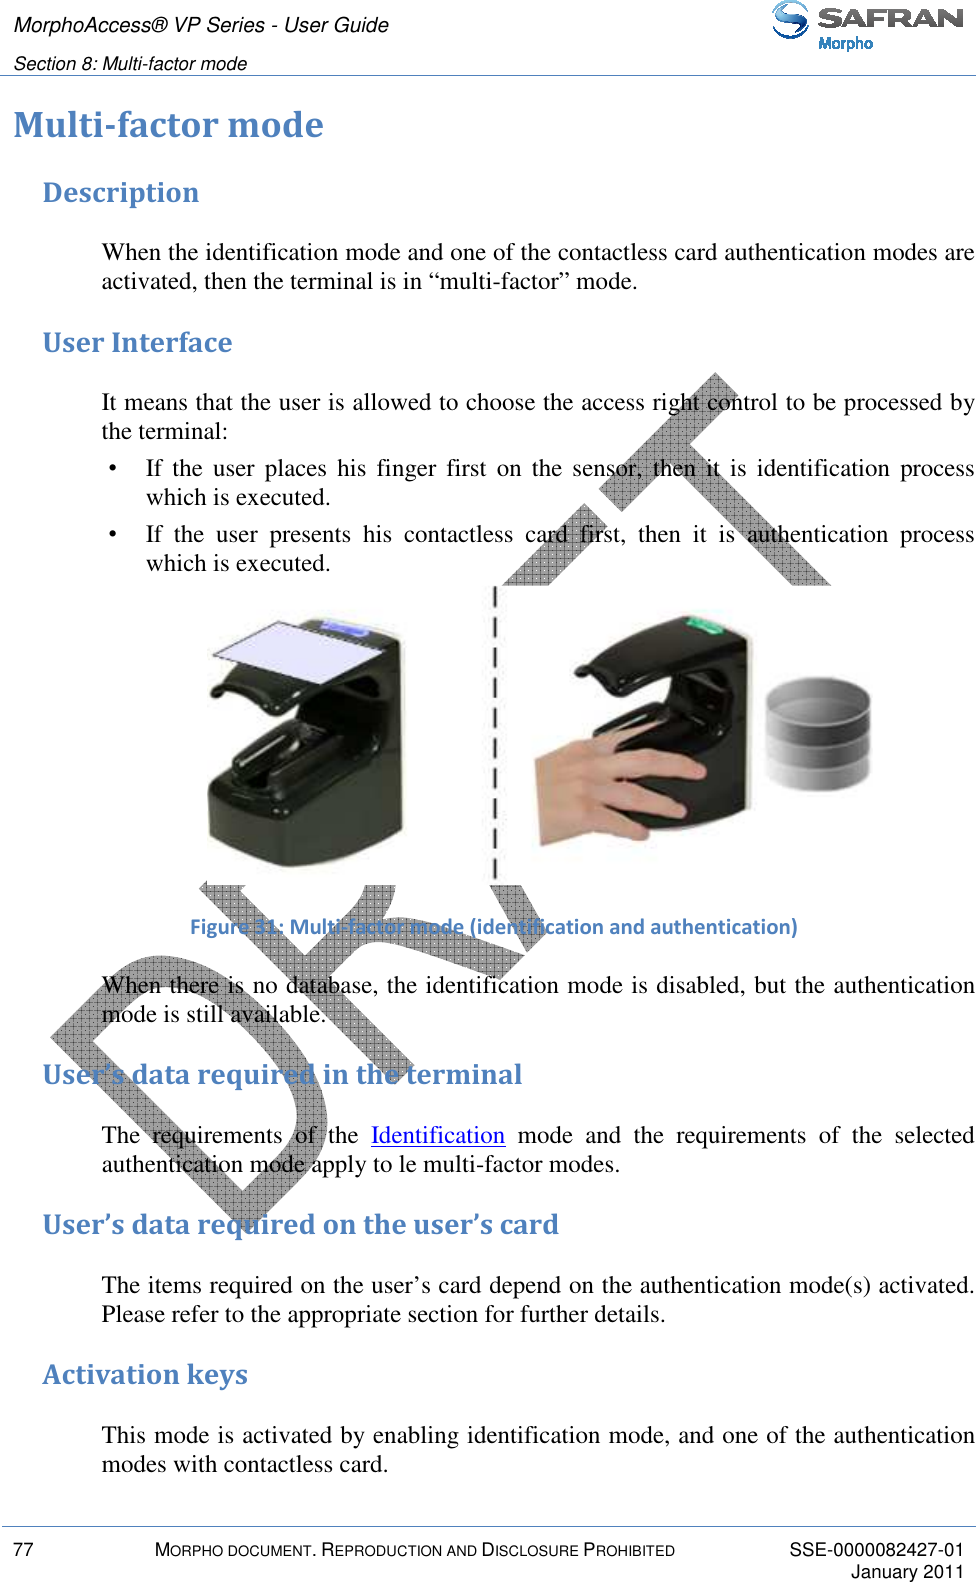 MorphoAccess® VP Series - User Guide   Section 8: Multi-factor mode         77  MORPHO DOCUMENT. REPRODUCTION AND DISCLOSURE PROHIBITED  SSE-0000082427-01     January 2011  Multi-factor mode Description When the identification mode and one of the contactless card authentication modes are activated, then the terminal is in “multi-factor” mode. User Interface It means that the user is allowed to choose the access right control to be processed by the terminal:  •  If the  user  places  his  finger  first  on  the sensor,  then it  is  identification  process which is executed. •  If  the  user  presents  his  contactless  card  first,  then  it  is  authentication  process which is executed.  Figure 31: Multi-factor mode (identification and authentication) When there is no database, the identification mode is disabled, but the authentication mode is still available.  User’s data required in the terminal The  requirements  of  the  Identification  mode  and  the  requirements  of  the  selected authentication mode apply to le multi-factor modes. User’s data required on the user’s card The items required on the user’s card depend on the authentication mode(s) activated. Please refer to the appropriate section for further details. Activation keys This mode is activated by enabling identification mode, and one of the authentication modes with contactless card. 